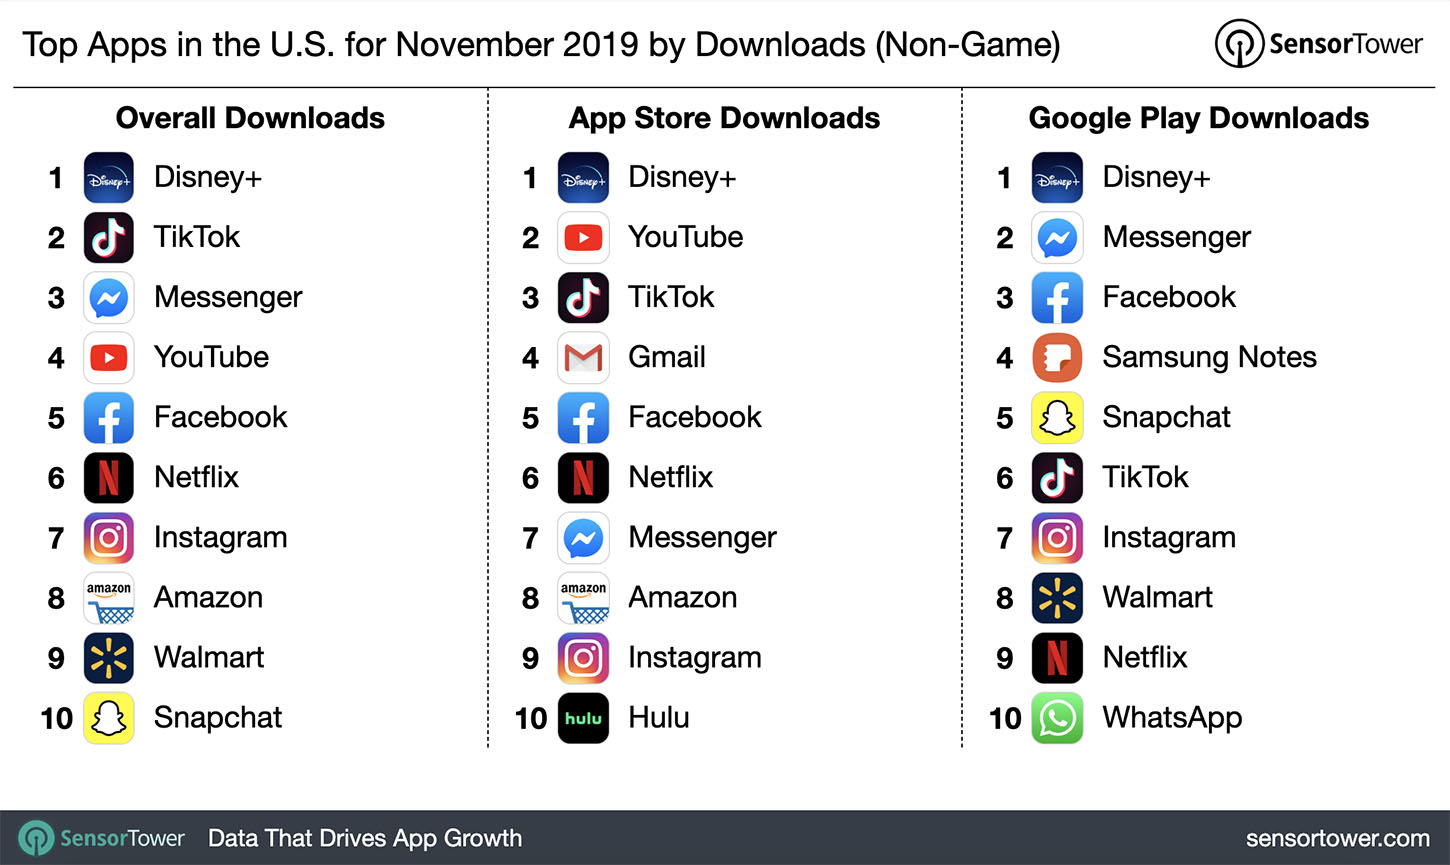 Top Apps in the U.S. for November 2019 by Downloads